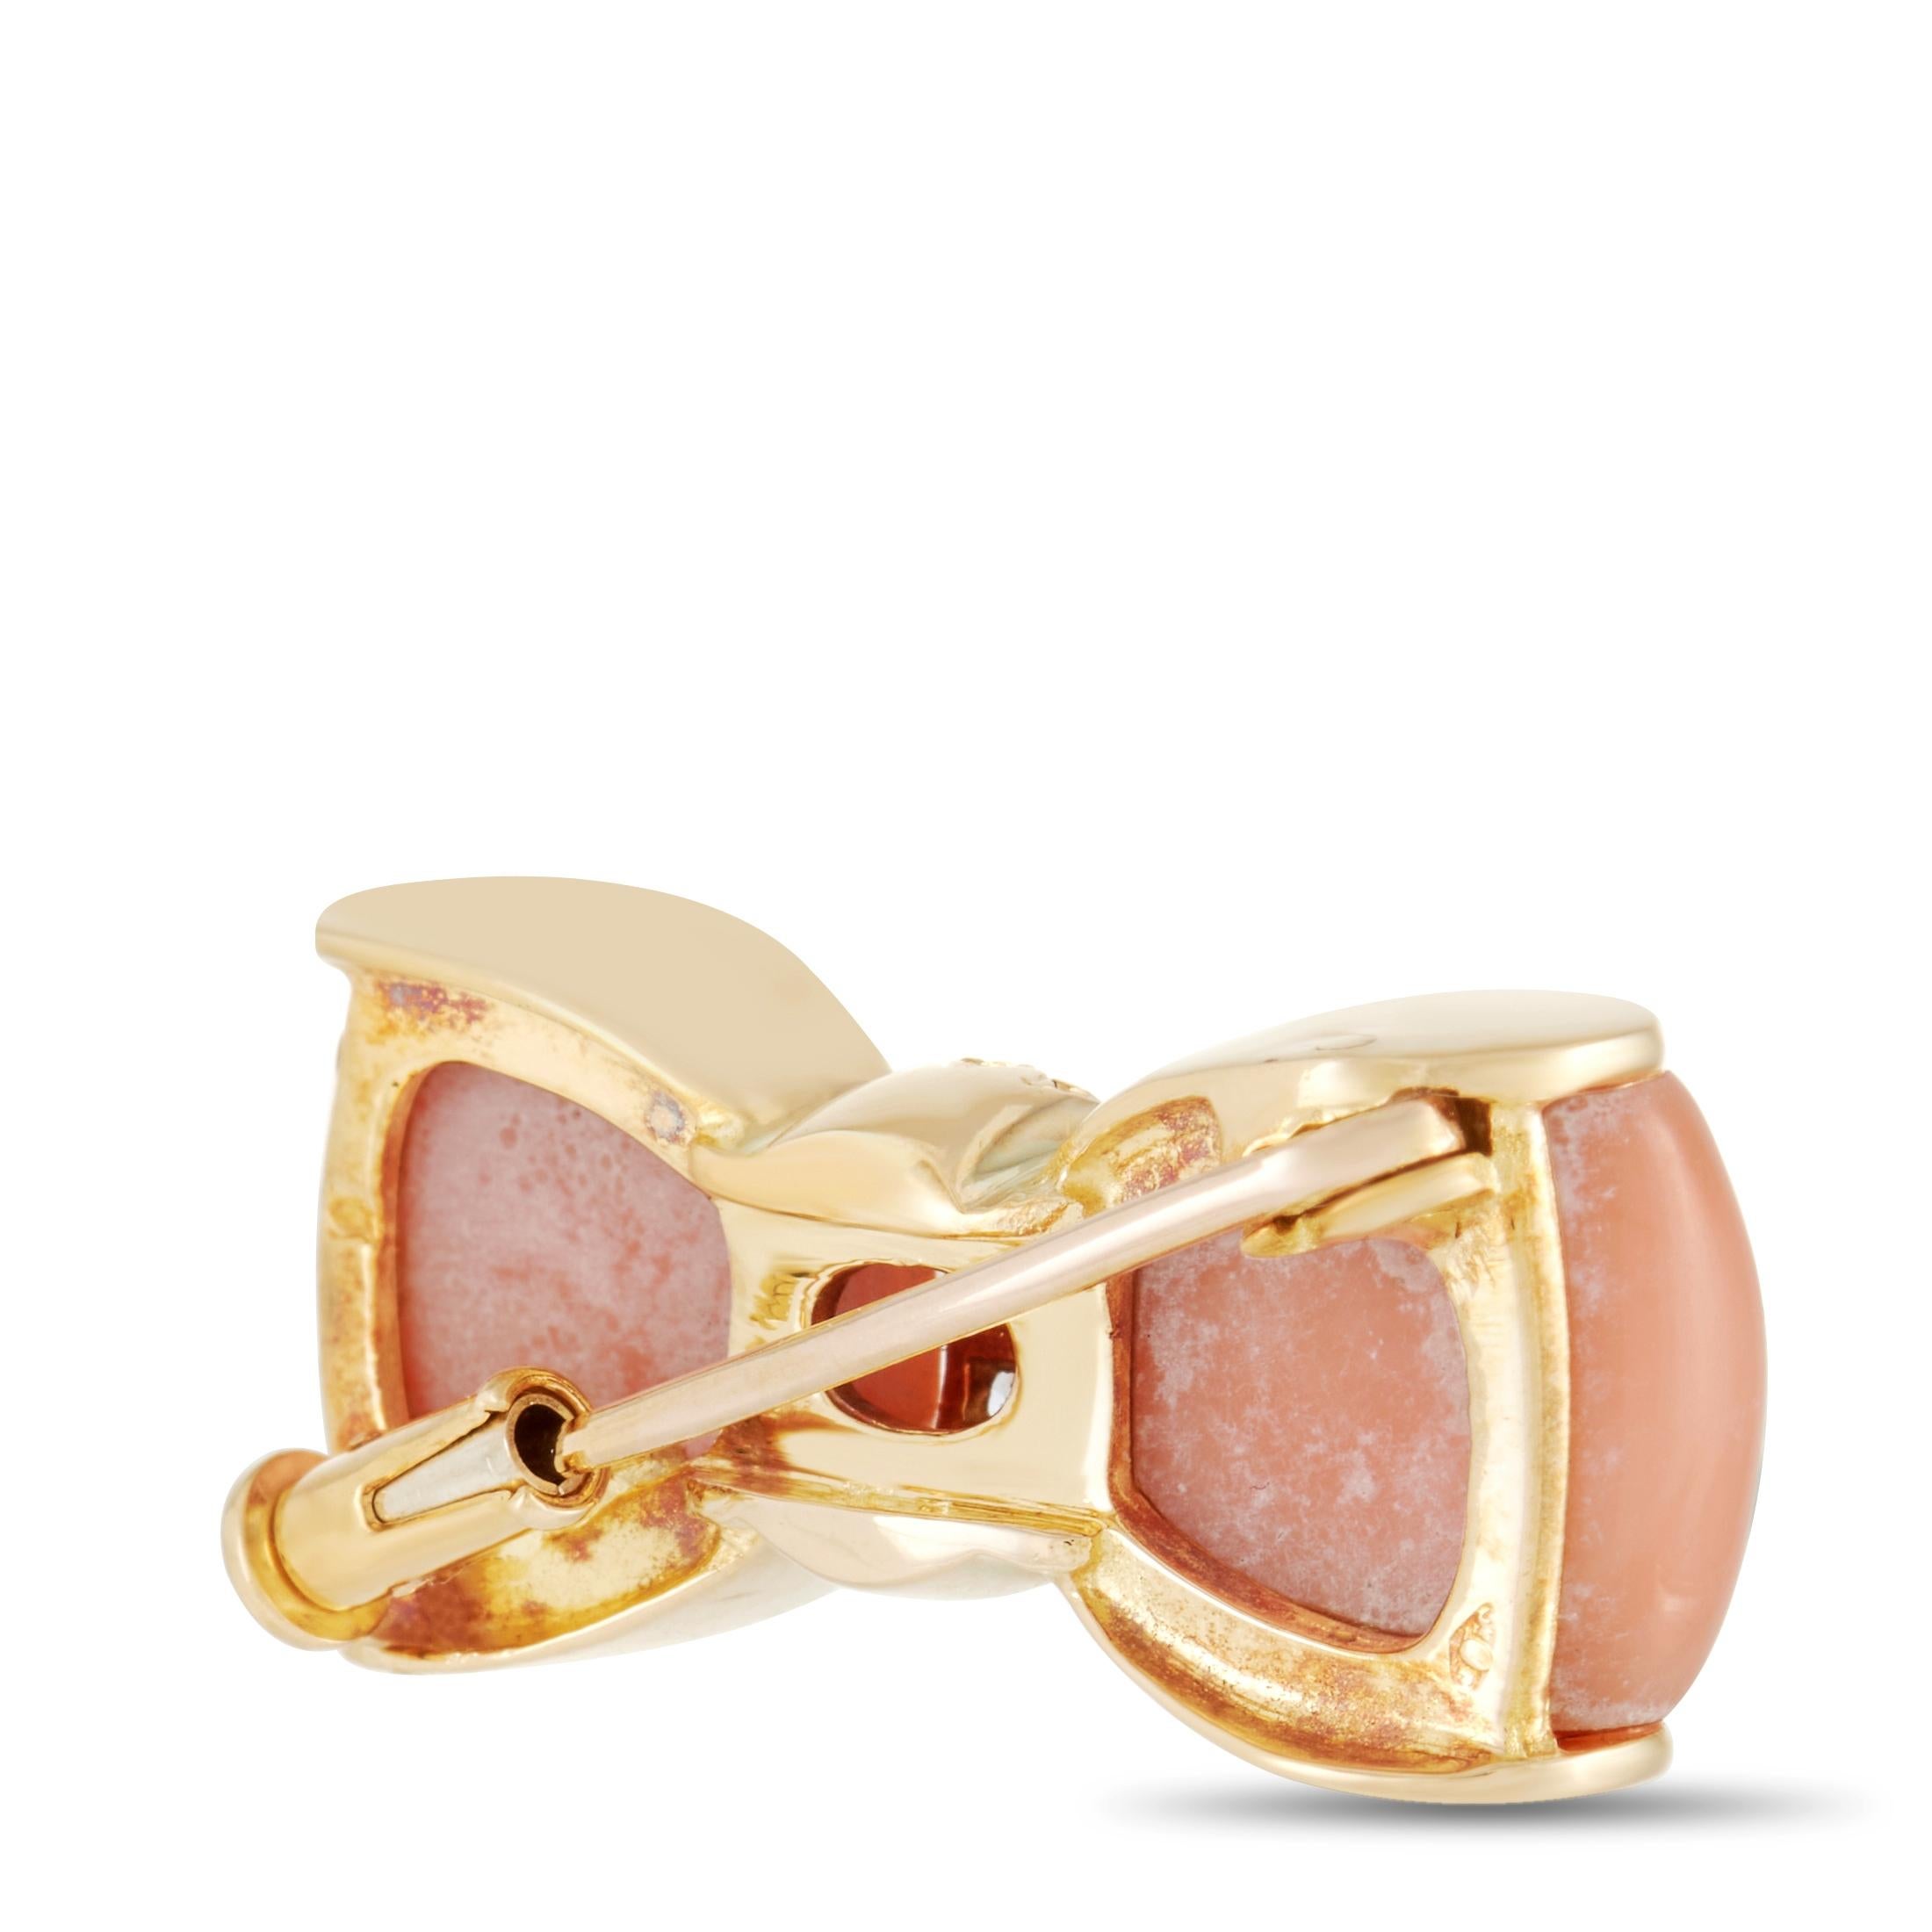 This charming vintage brooch from Van Cleef & Arpels is poised to make a luxurious statement no matter where it’s worn. Measuring 0.5” long and 1” wide, Coral and 18K Yellow Gold pair together beautifully. At the center, an array of diamonds